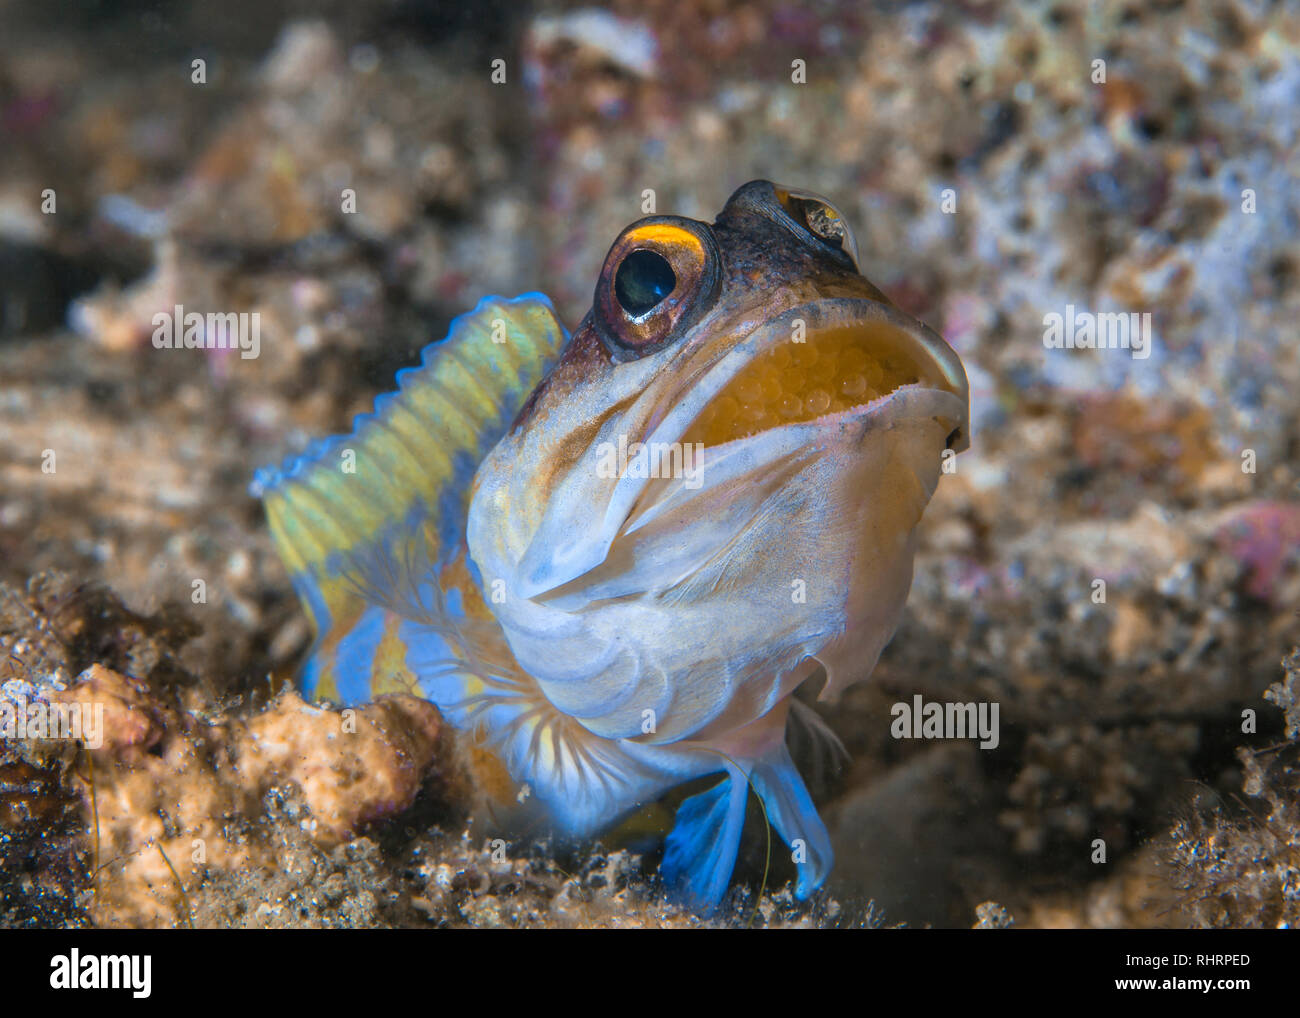 Yellowheaded Jawfish (Opistognathus aurifrons) inncubating eggs in its mouth emerges from burrow. Lembeh Straits, Indonesia Stock Photo